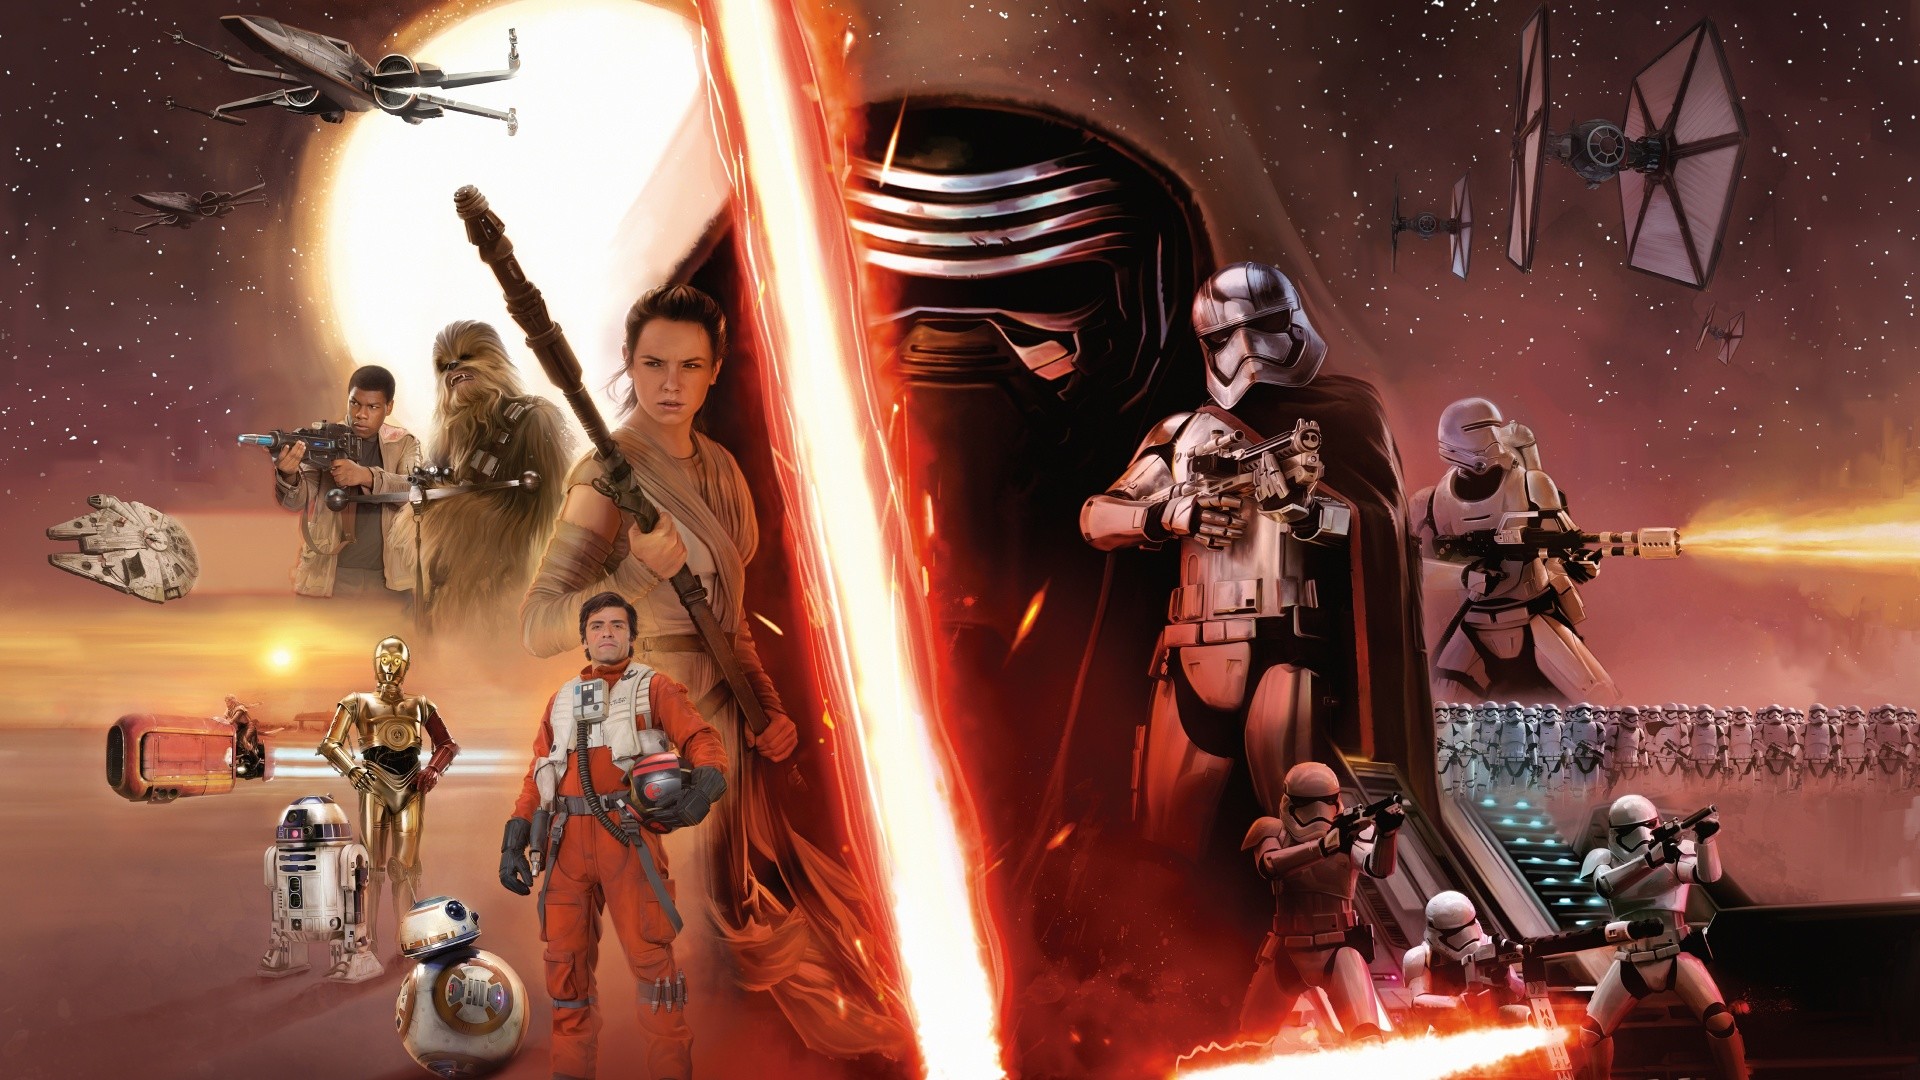 Star Wars Episode 7 The Force Awakens Wallpapers